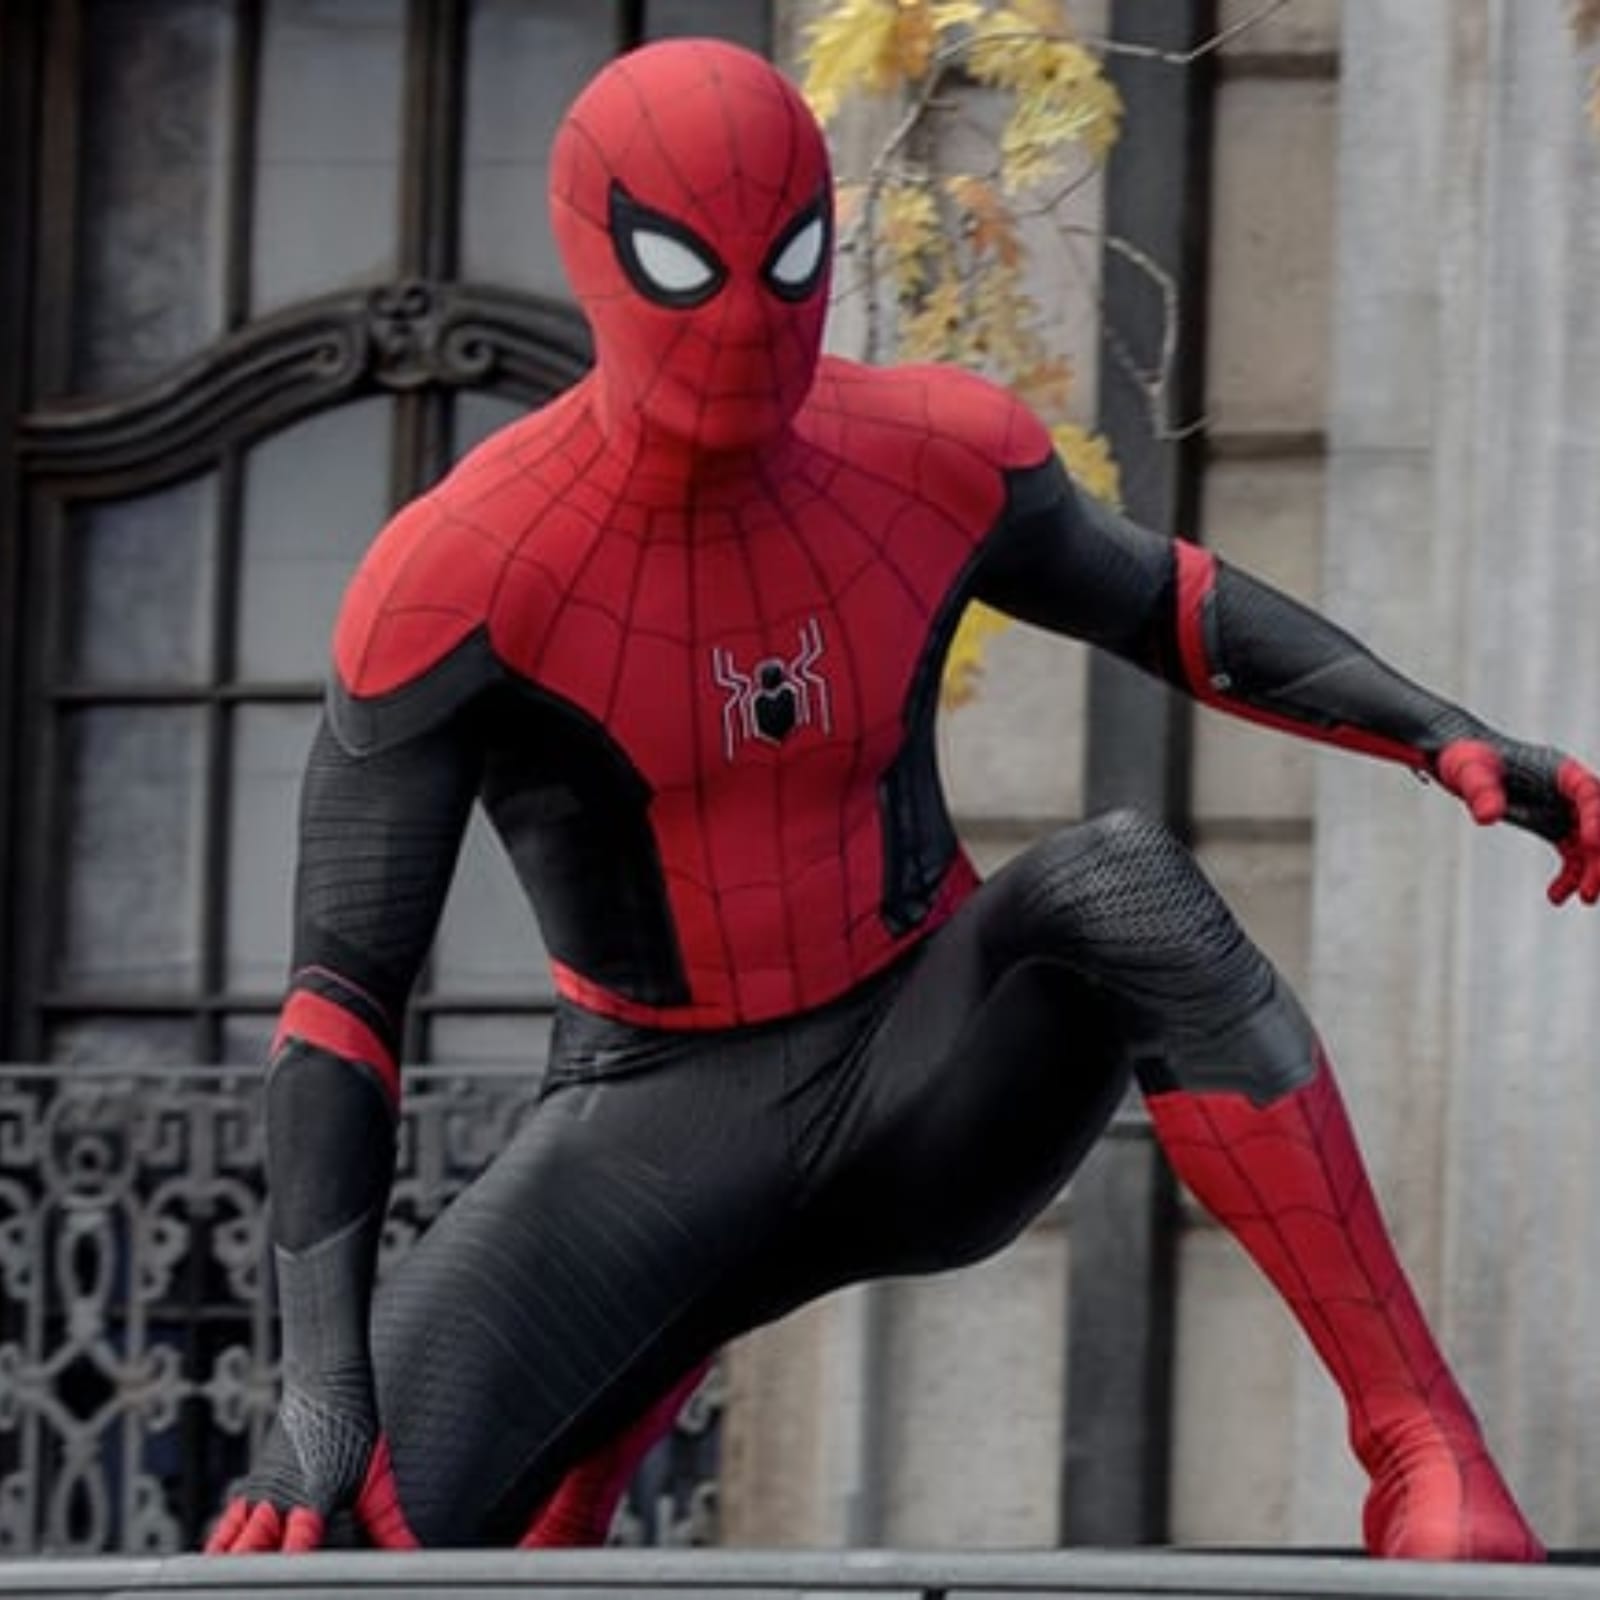 Will Tom Holland return as Spider-Man for Spider-Man 4? Find Out